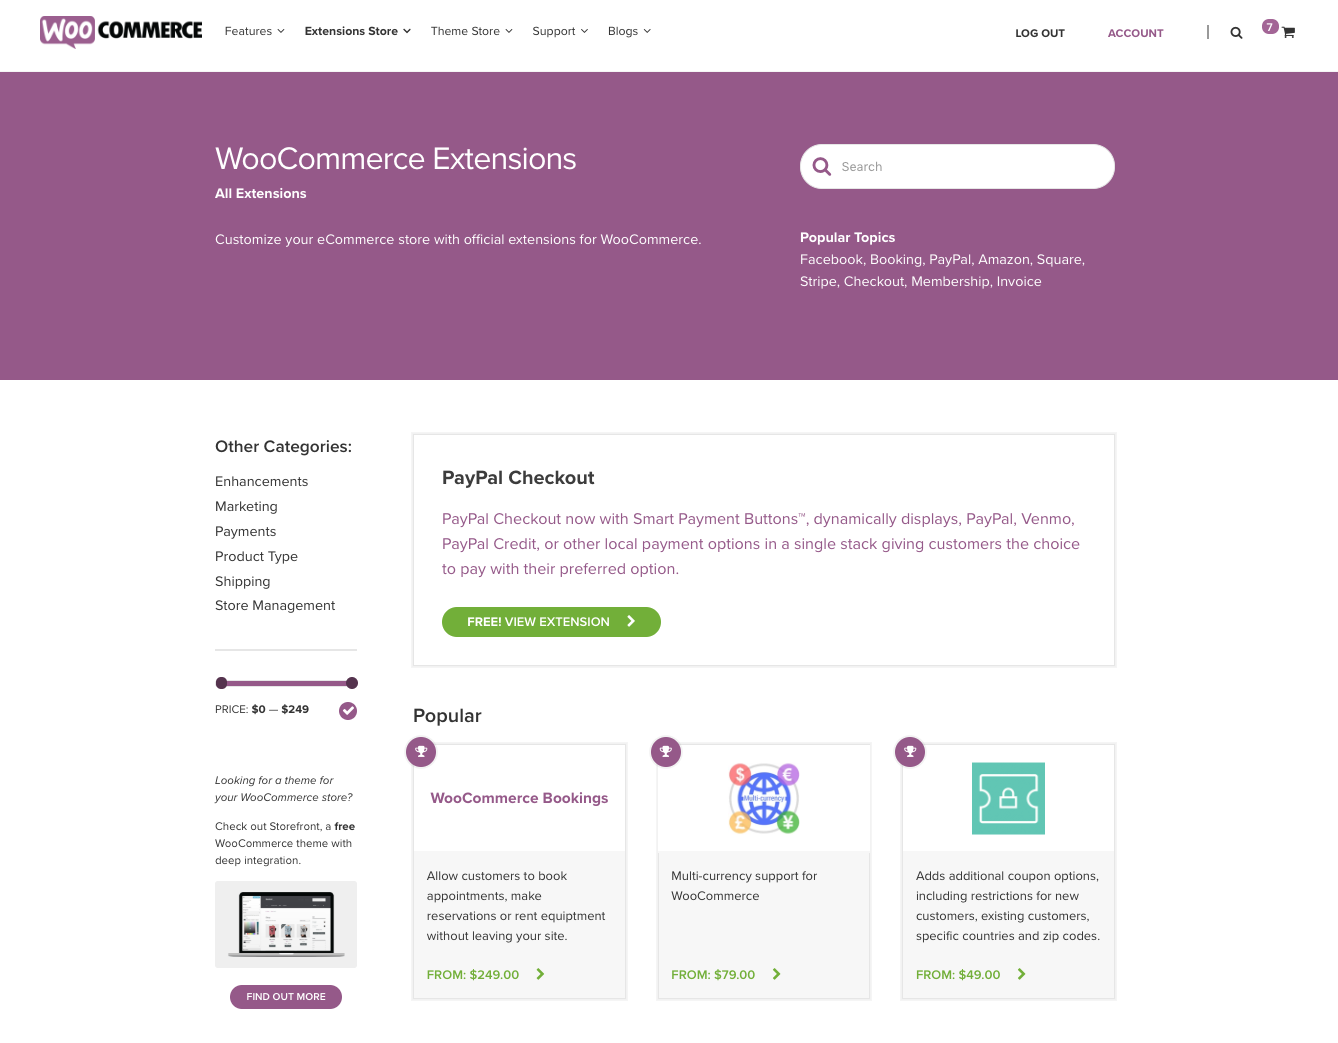 WooCommerce extension library, providing unlimited functionality